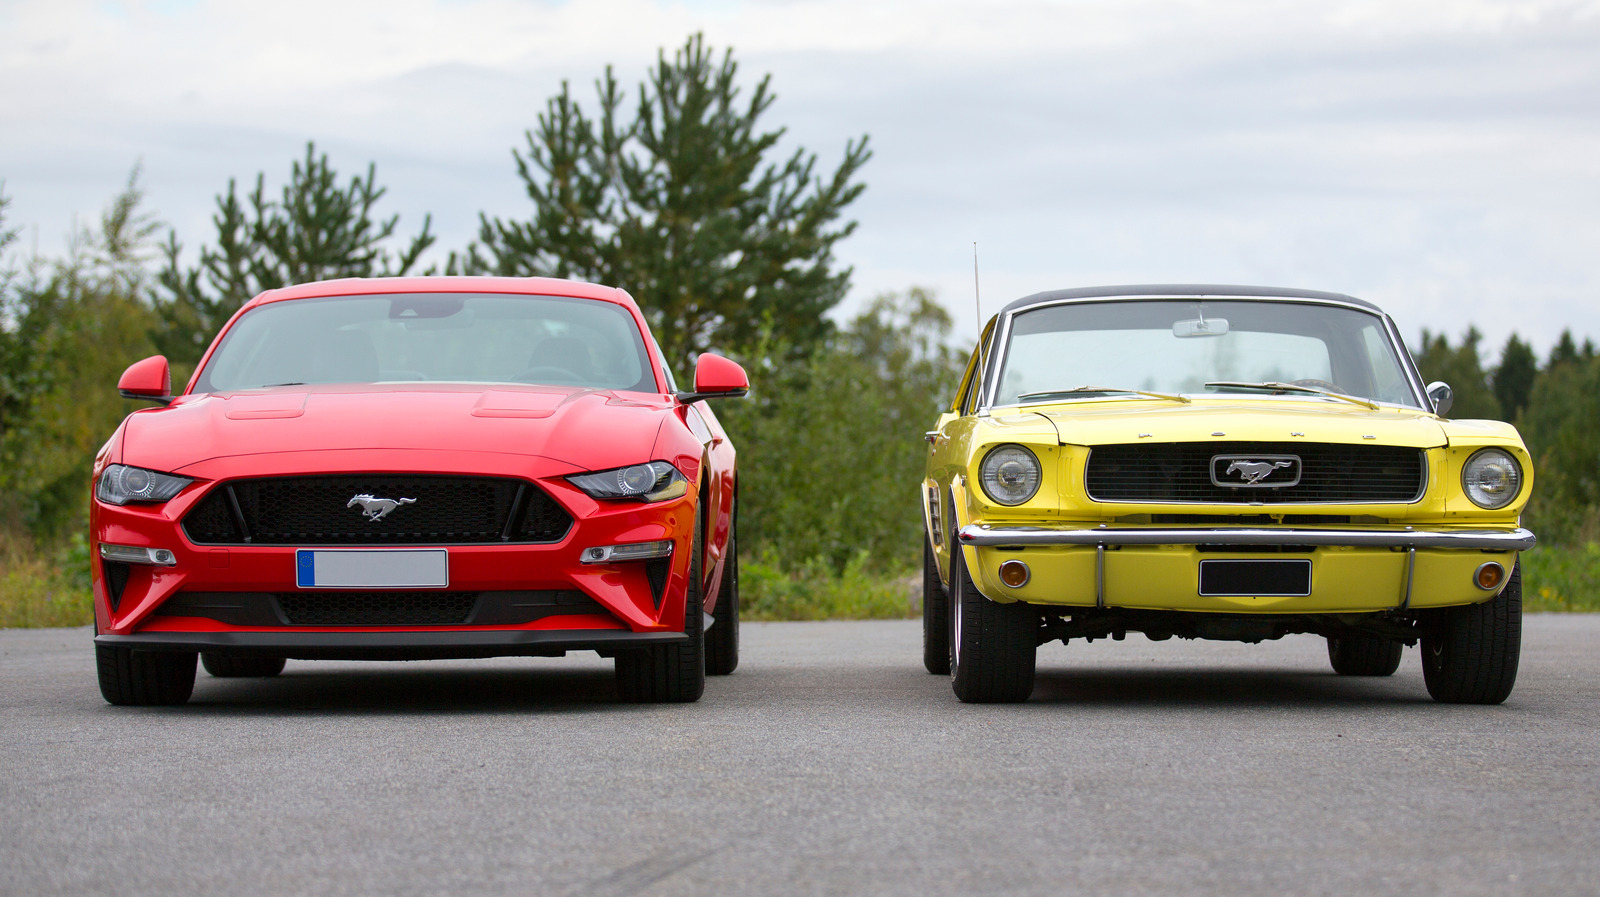 The Ford Mustang: Every Generation Of The Iconic Pony Car Explained